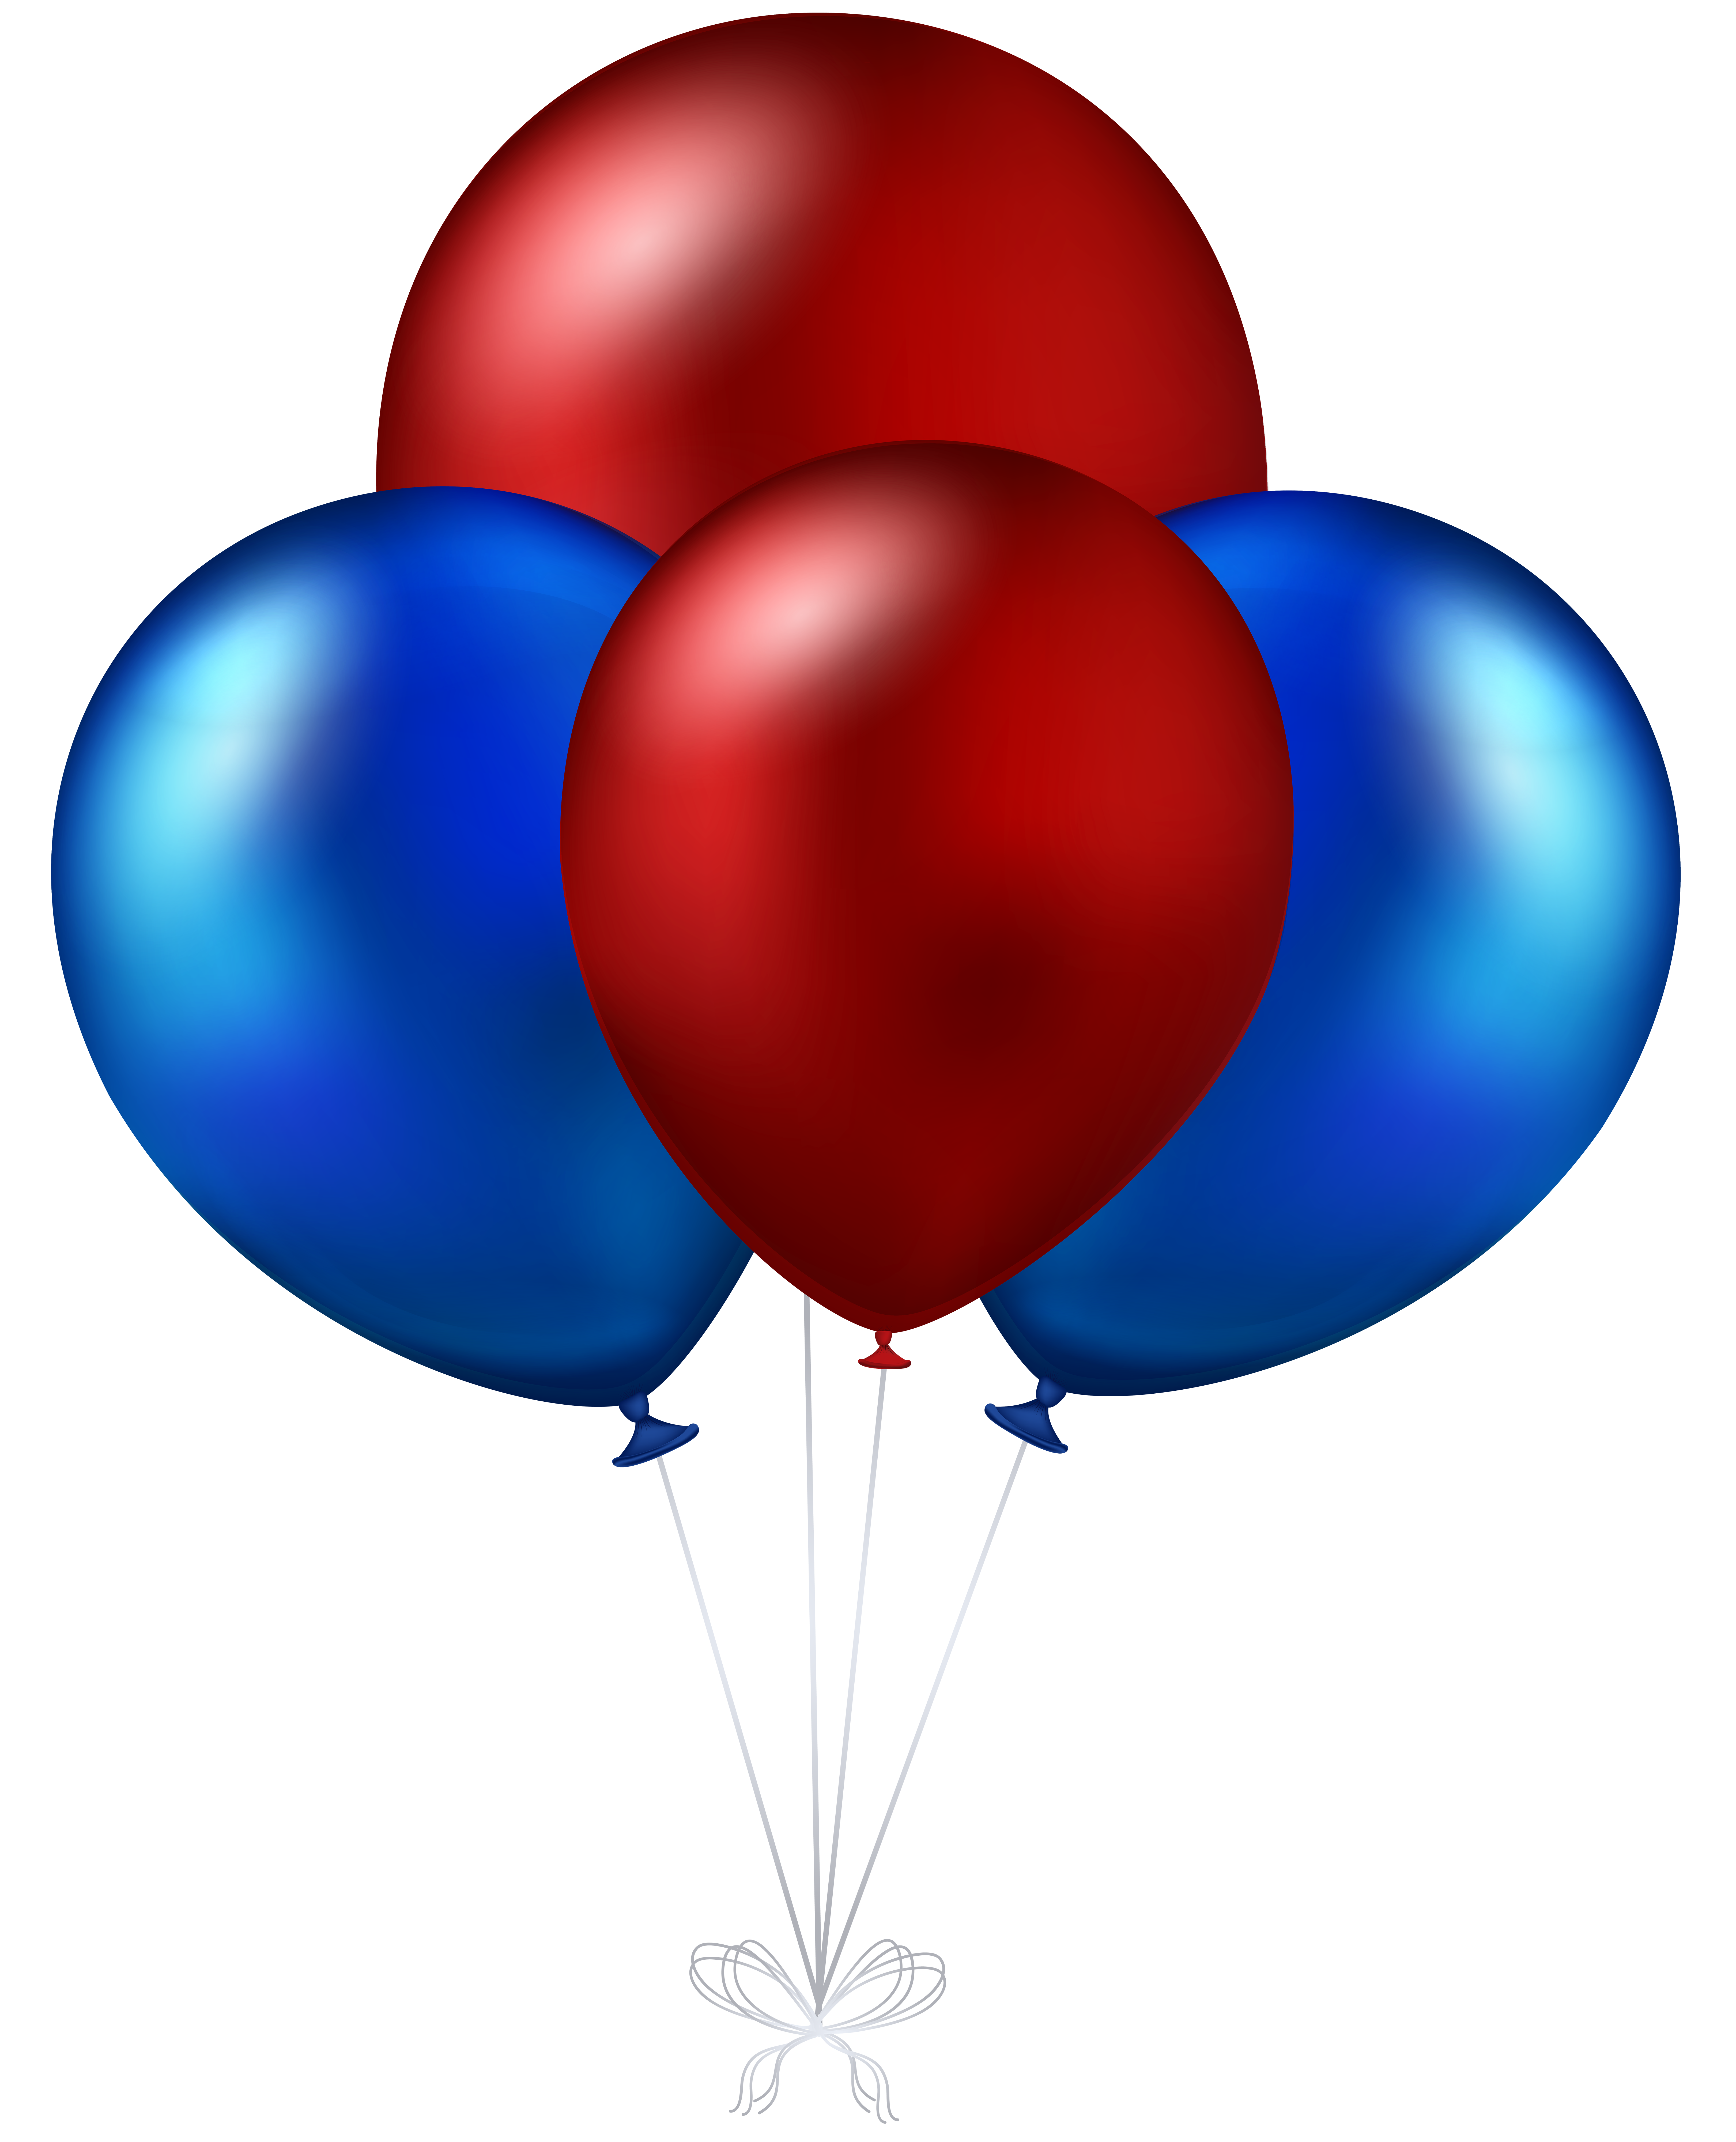 Red and Blue Balloons Transparent PNG Clip Art Image.